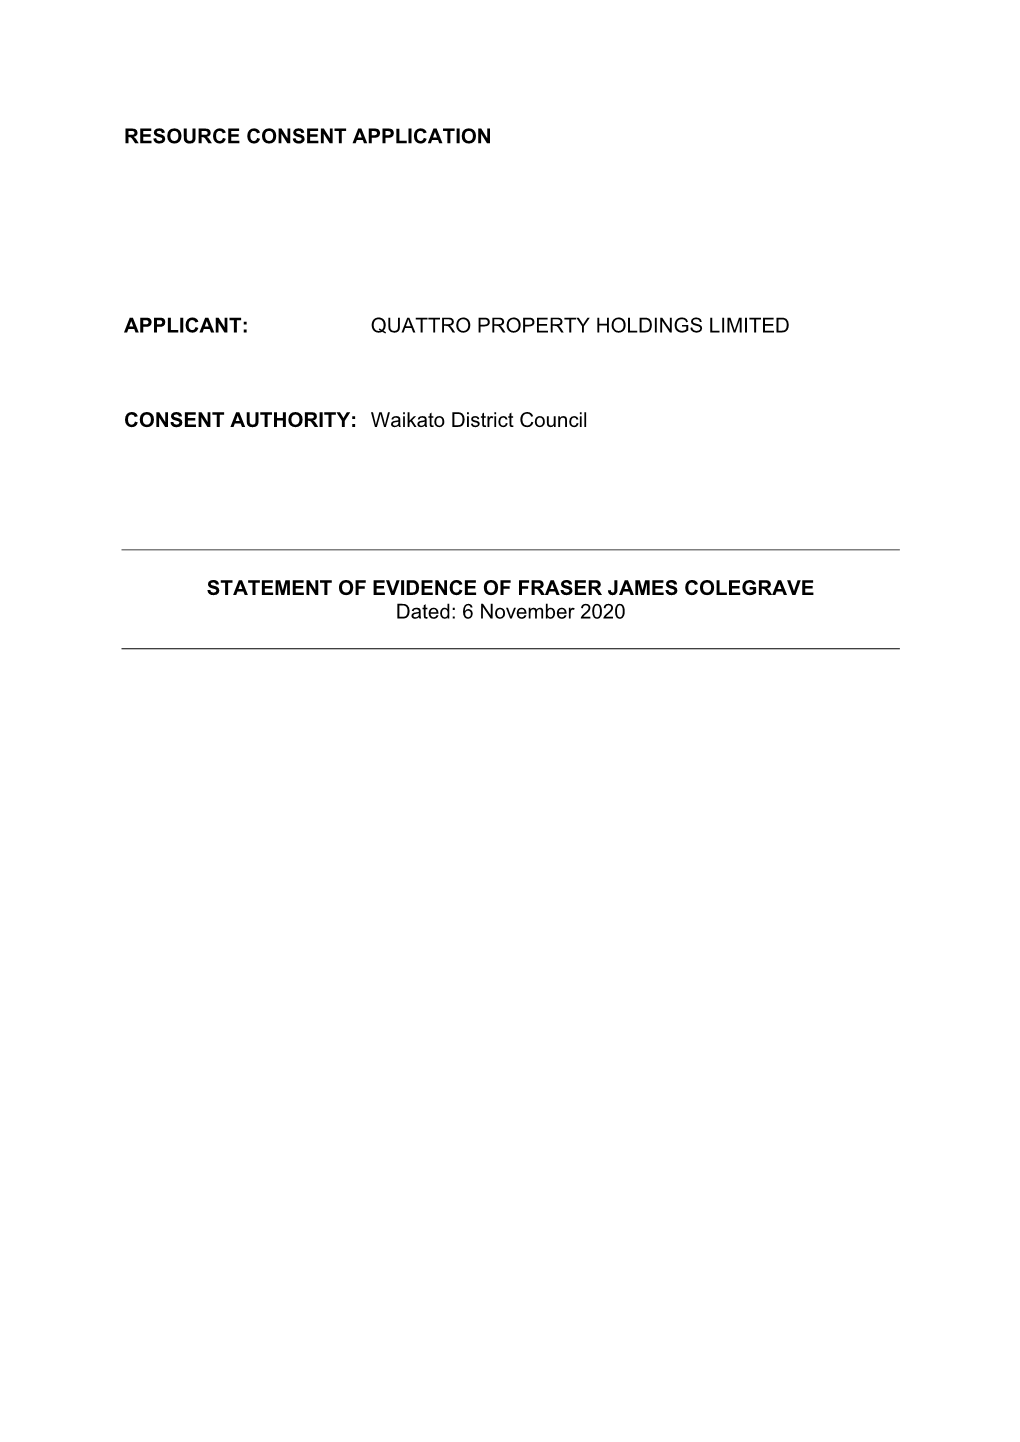 Quattro Property Holdings Limited Consent Authority